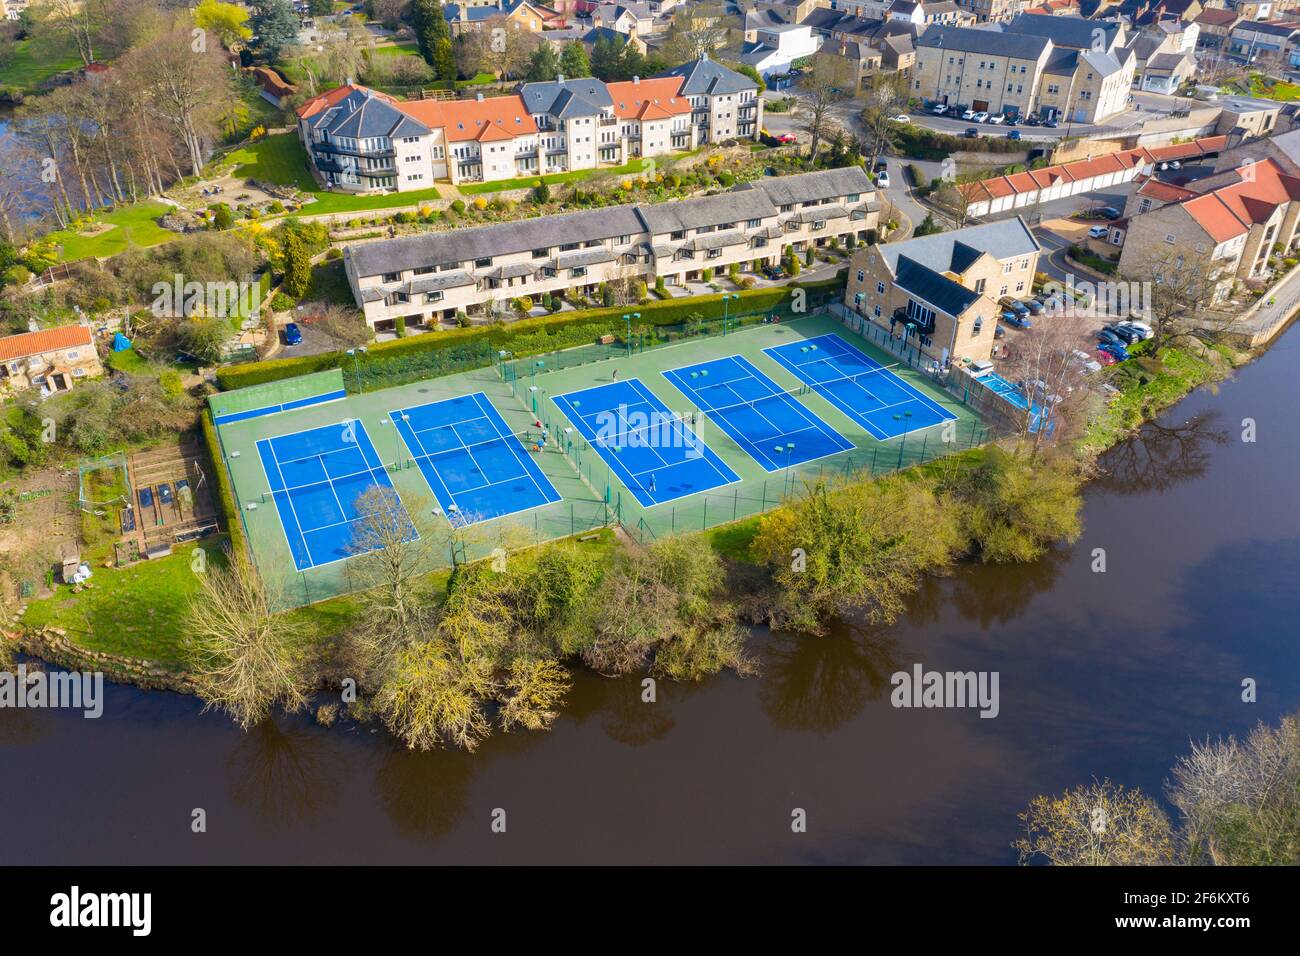 Aerial photo of the beautiful village of Wetherby in the UK showing rows of tennis courts near the river Stock Photo